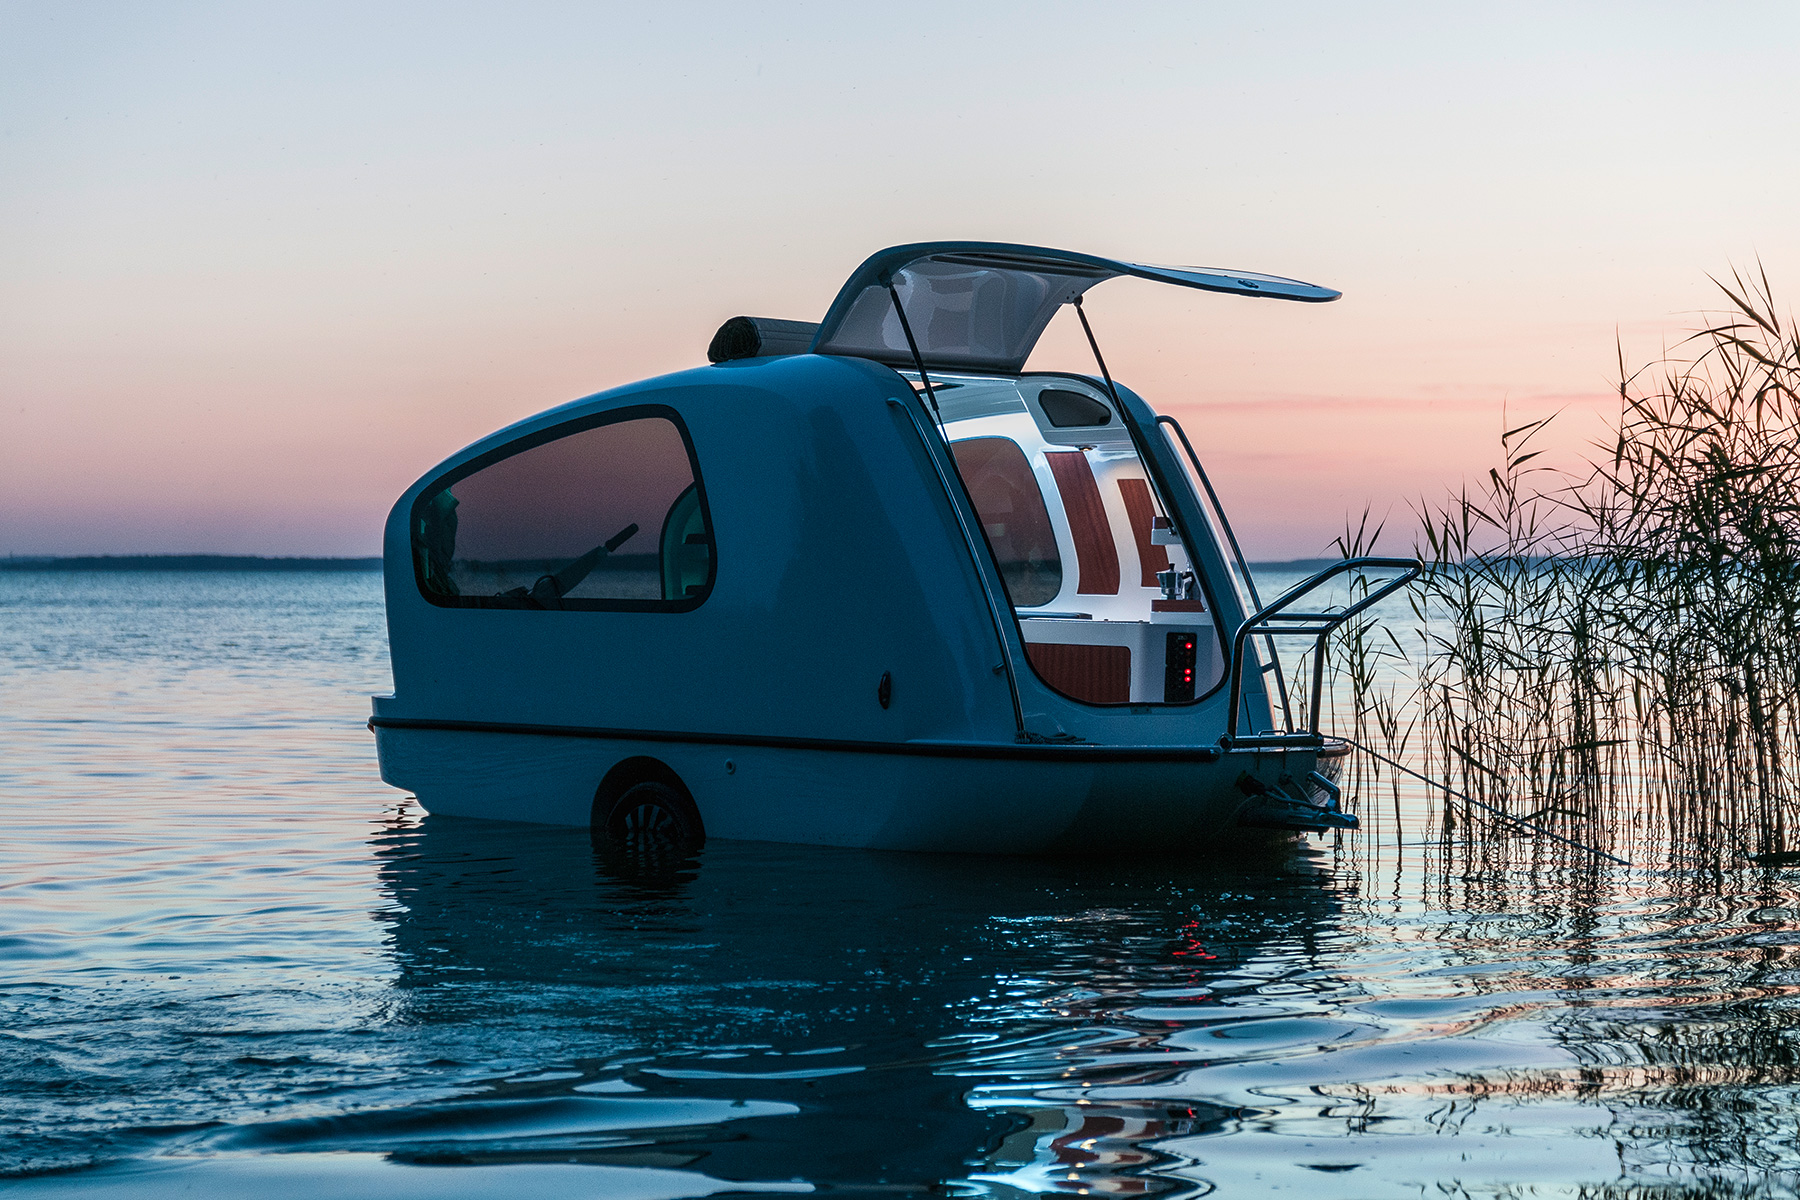 The Sealander Is an RV That Doubles as a Yacht